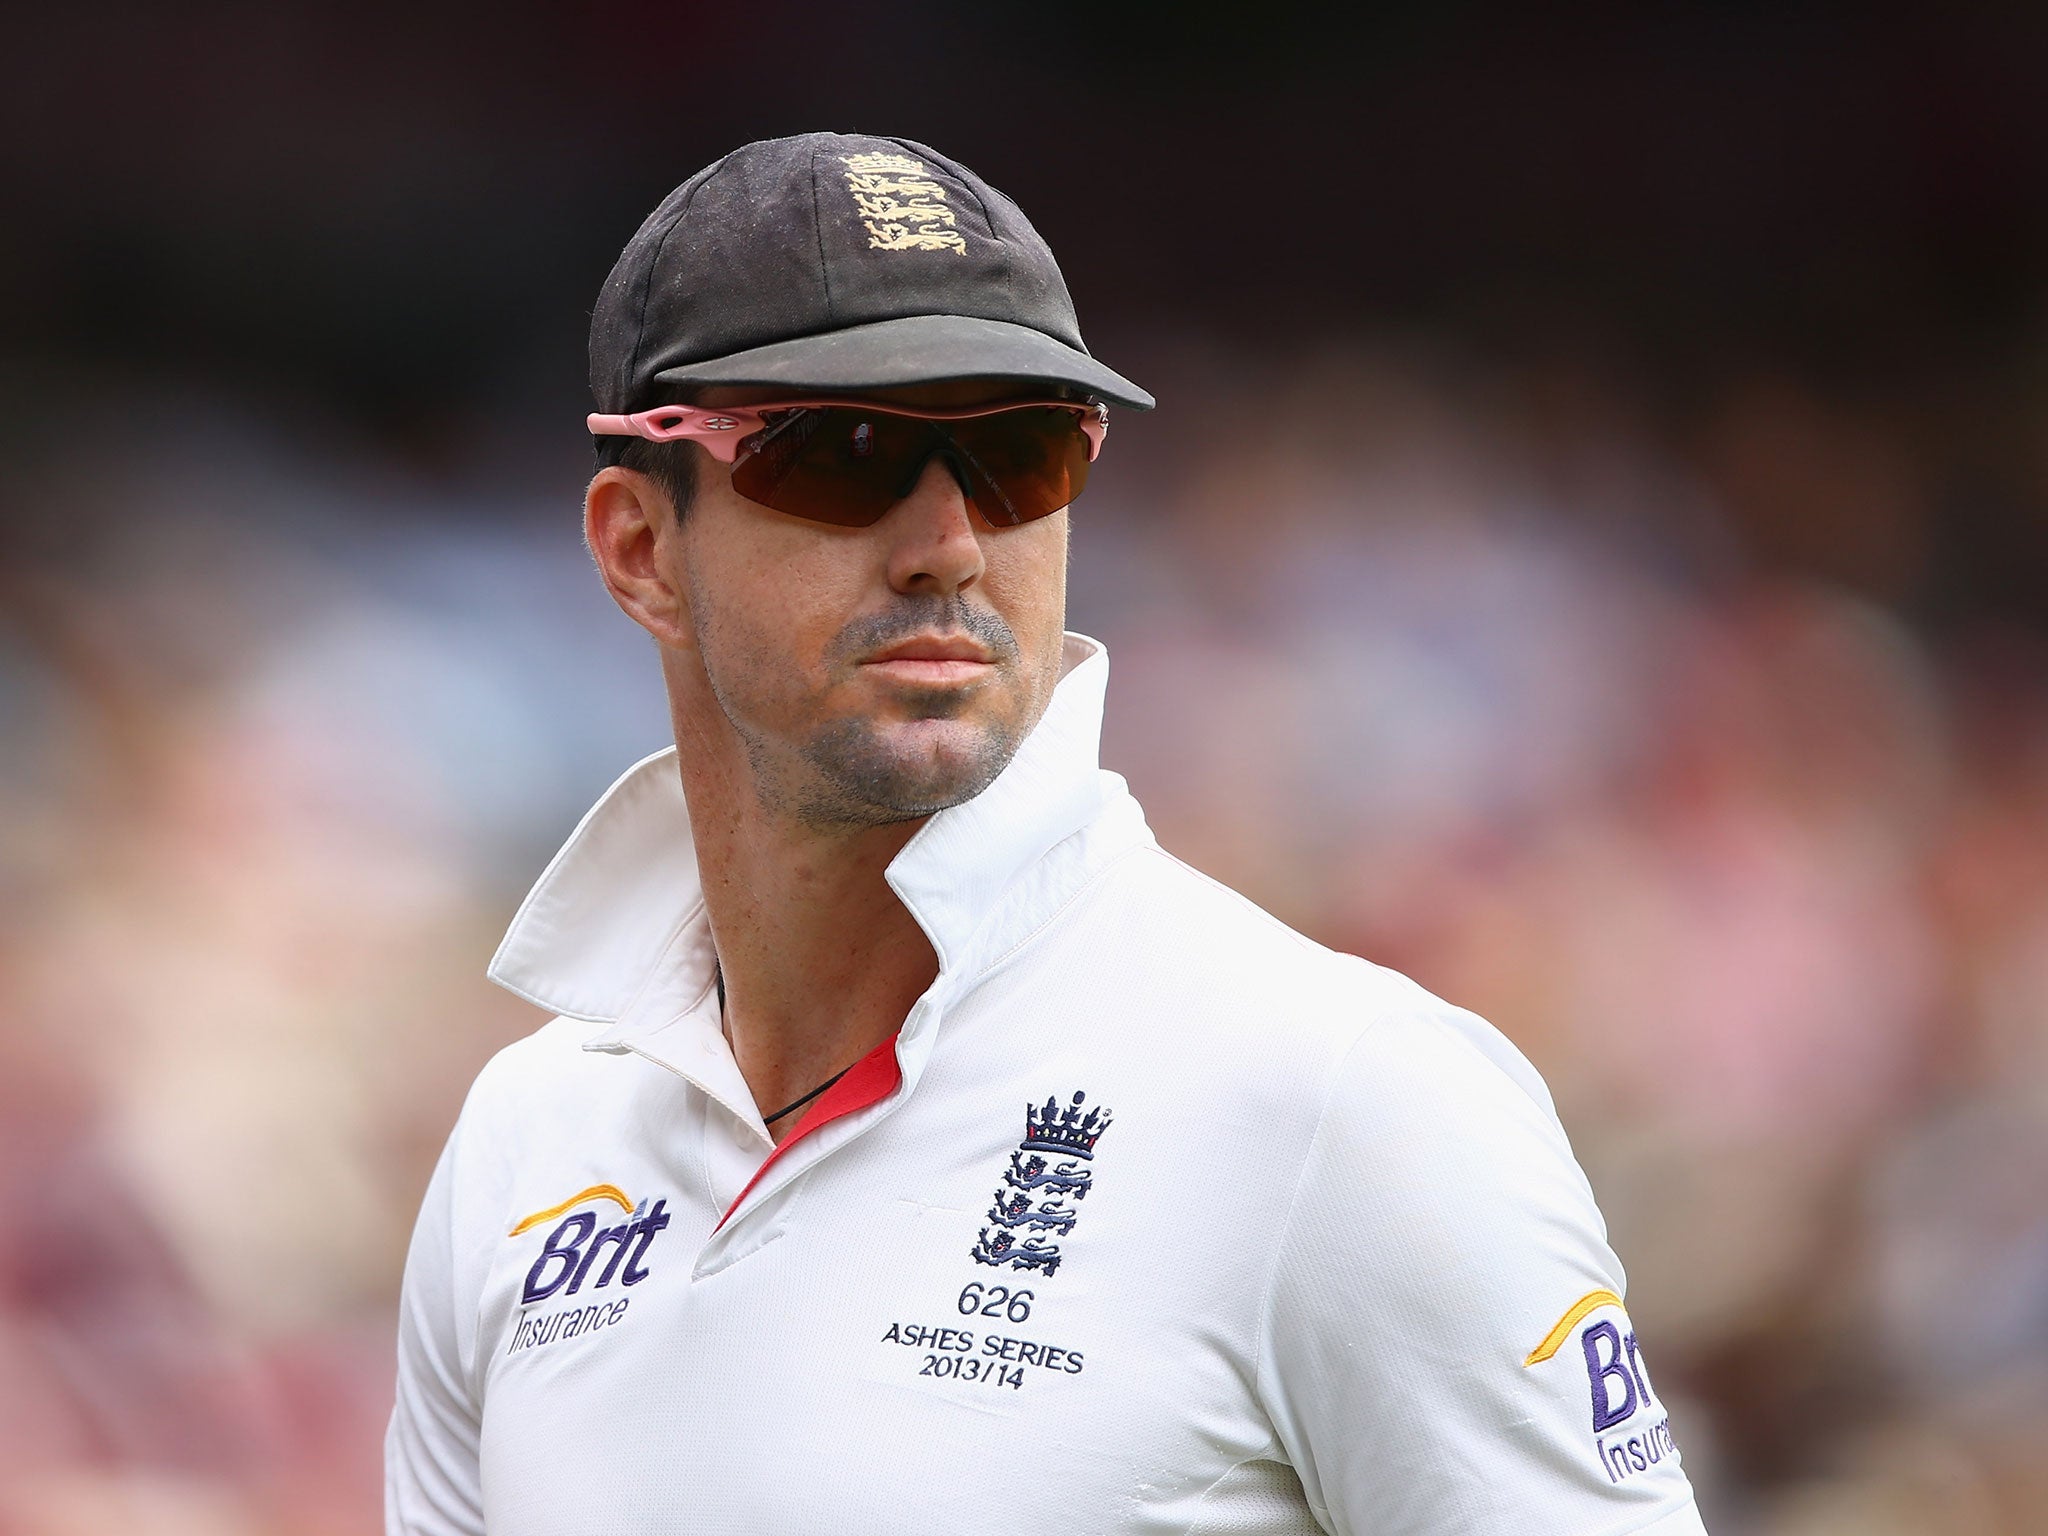 Kevin Pietersen is in talks to return to the England team